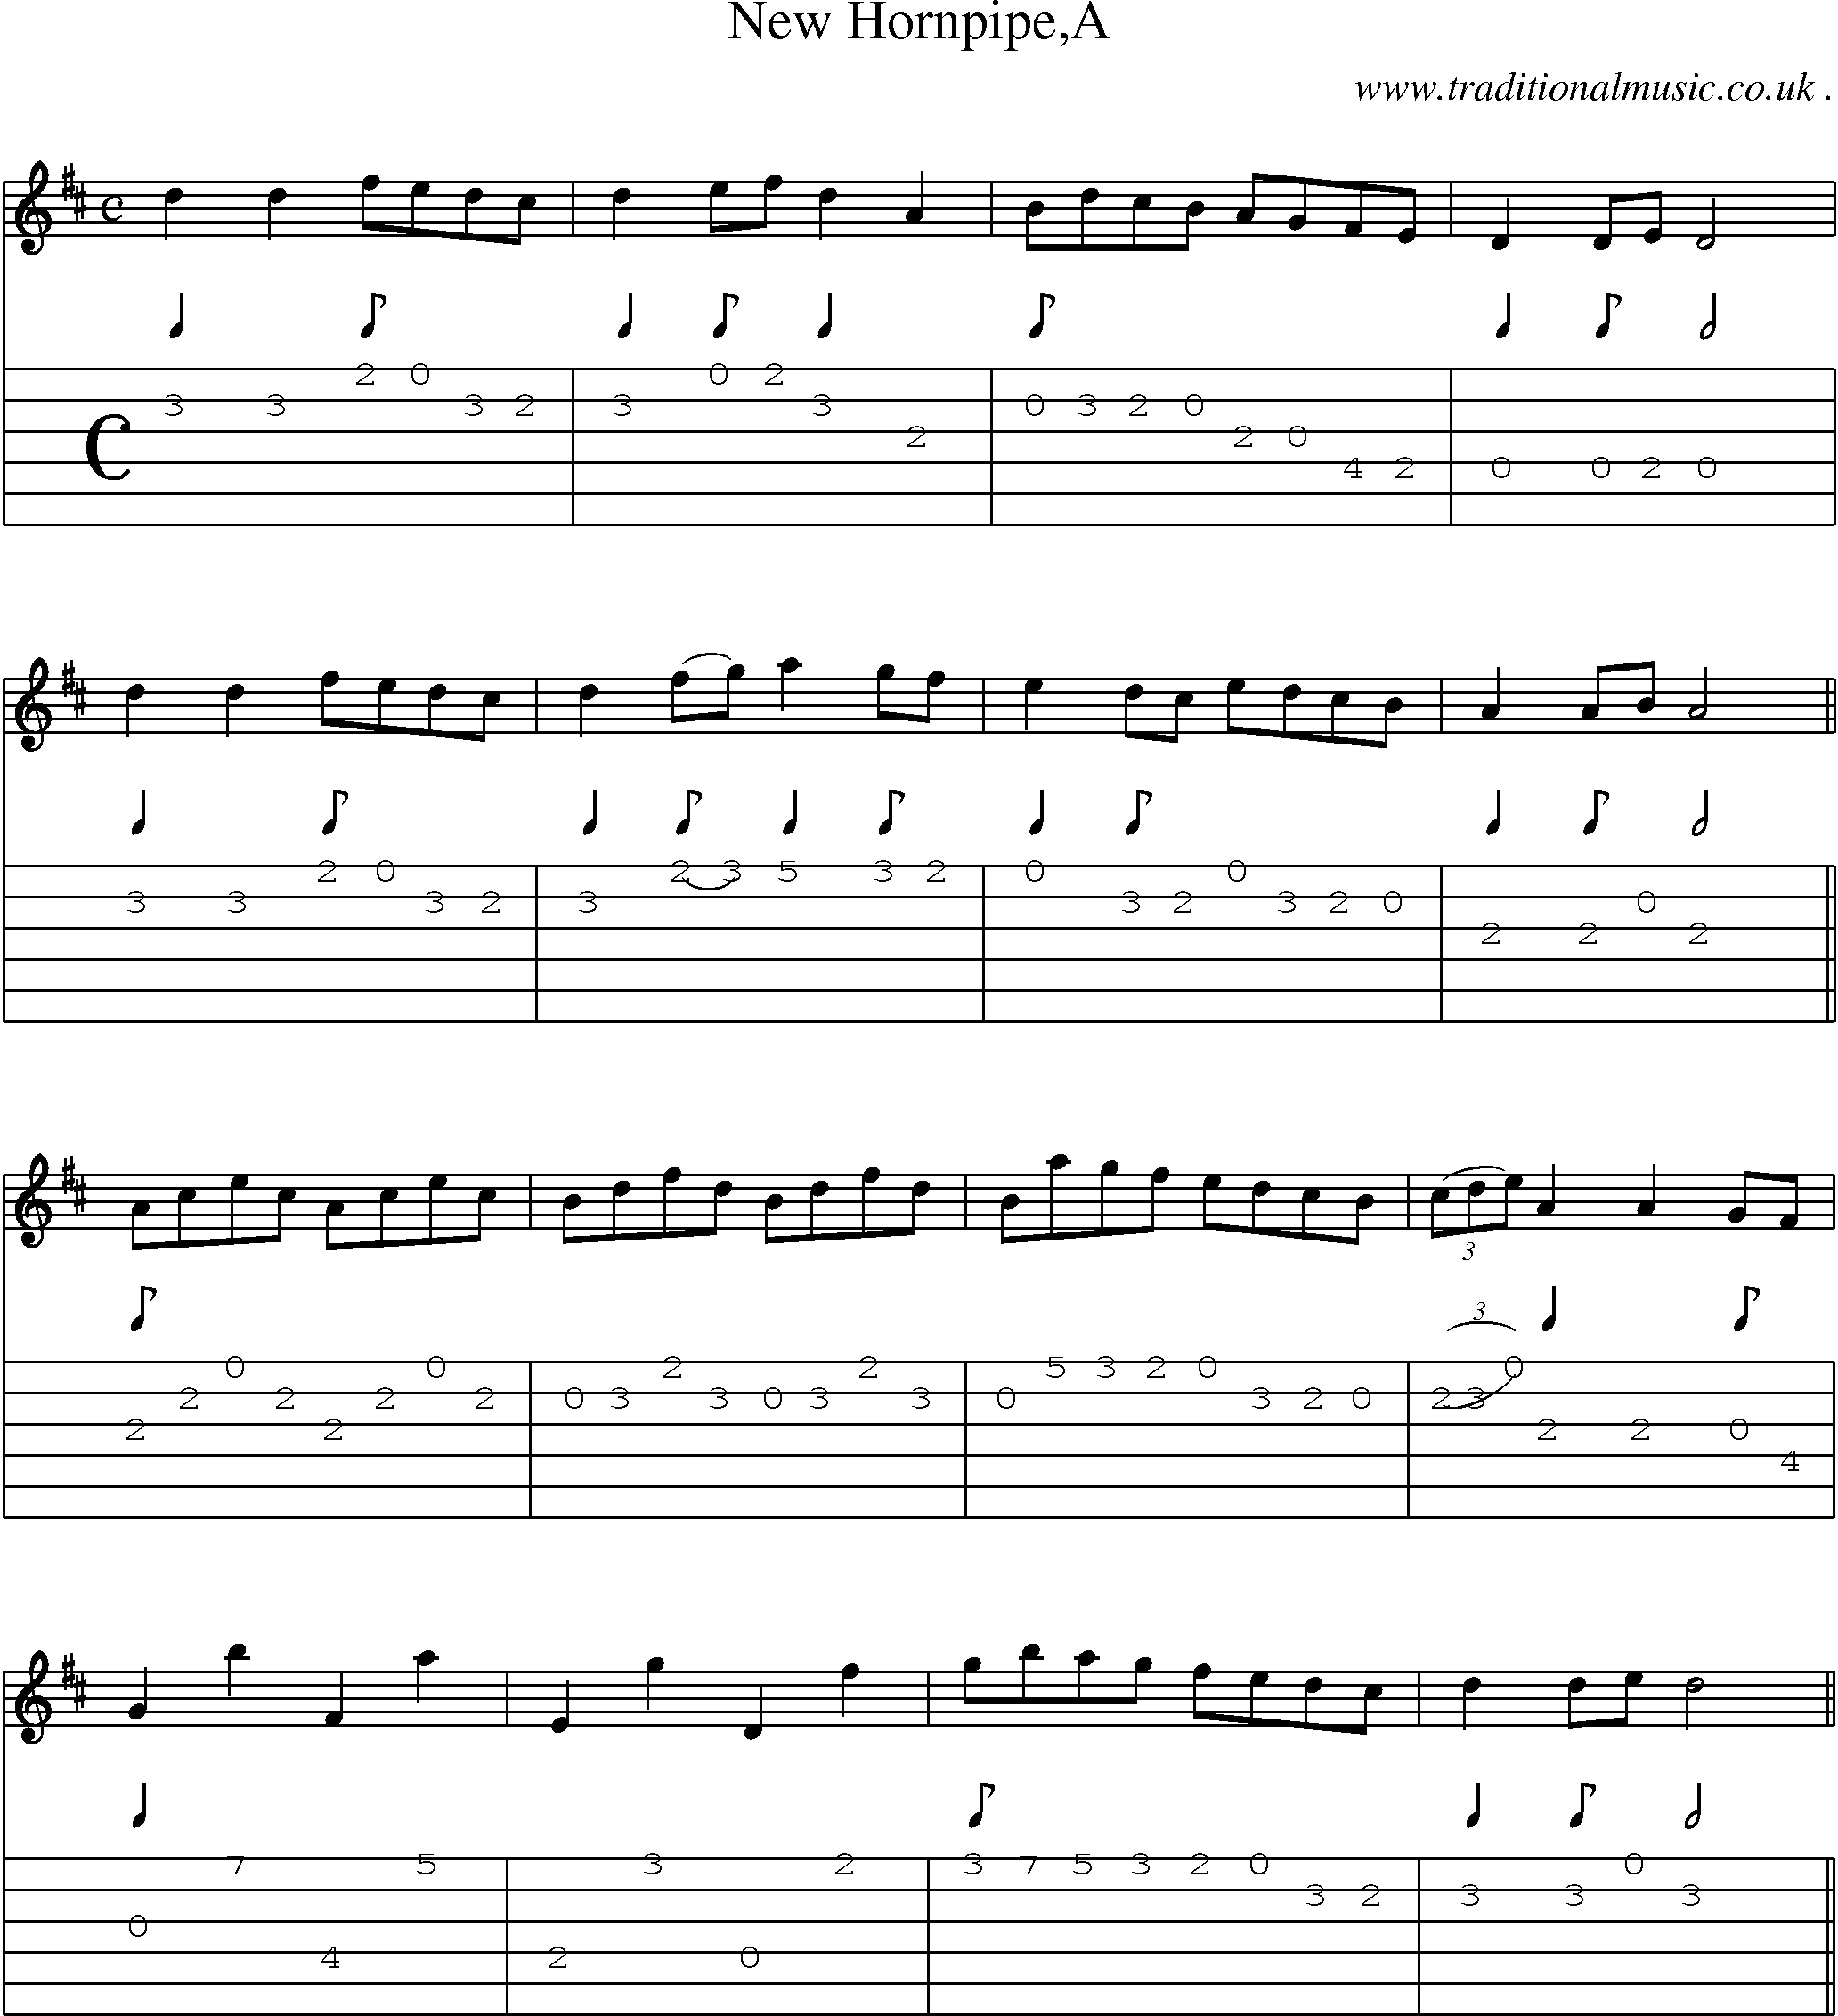 Sheet-Music and Guitar Tabs for New Hornpipea